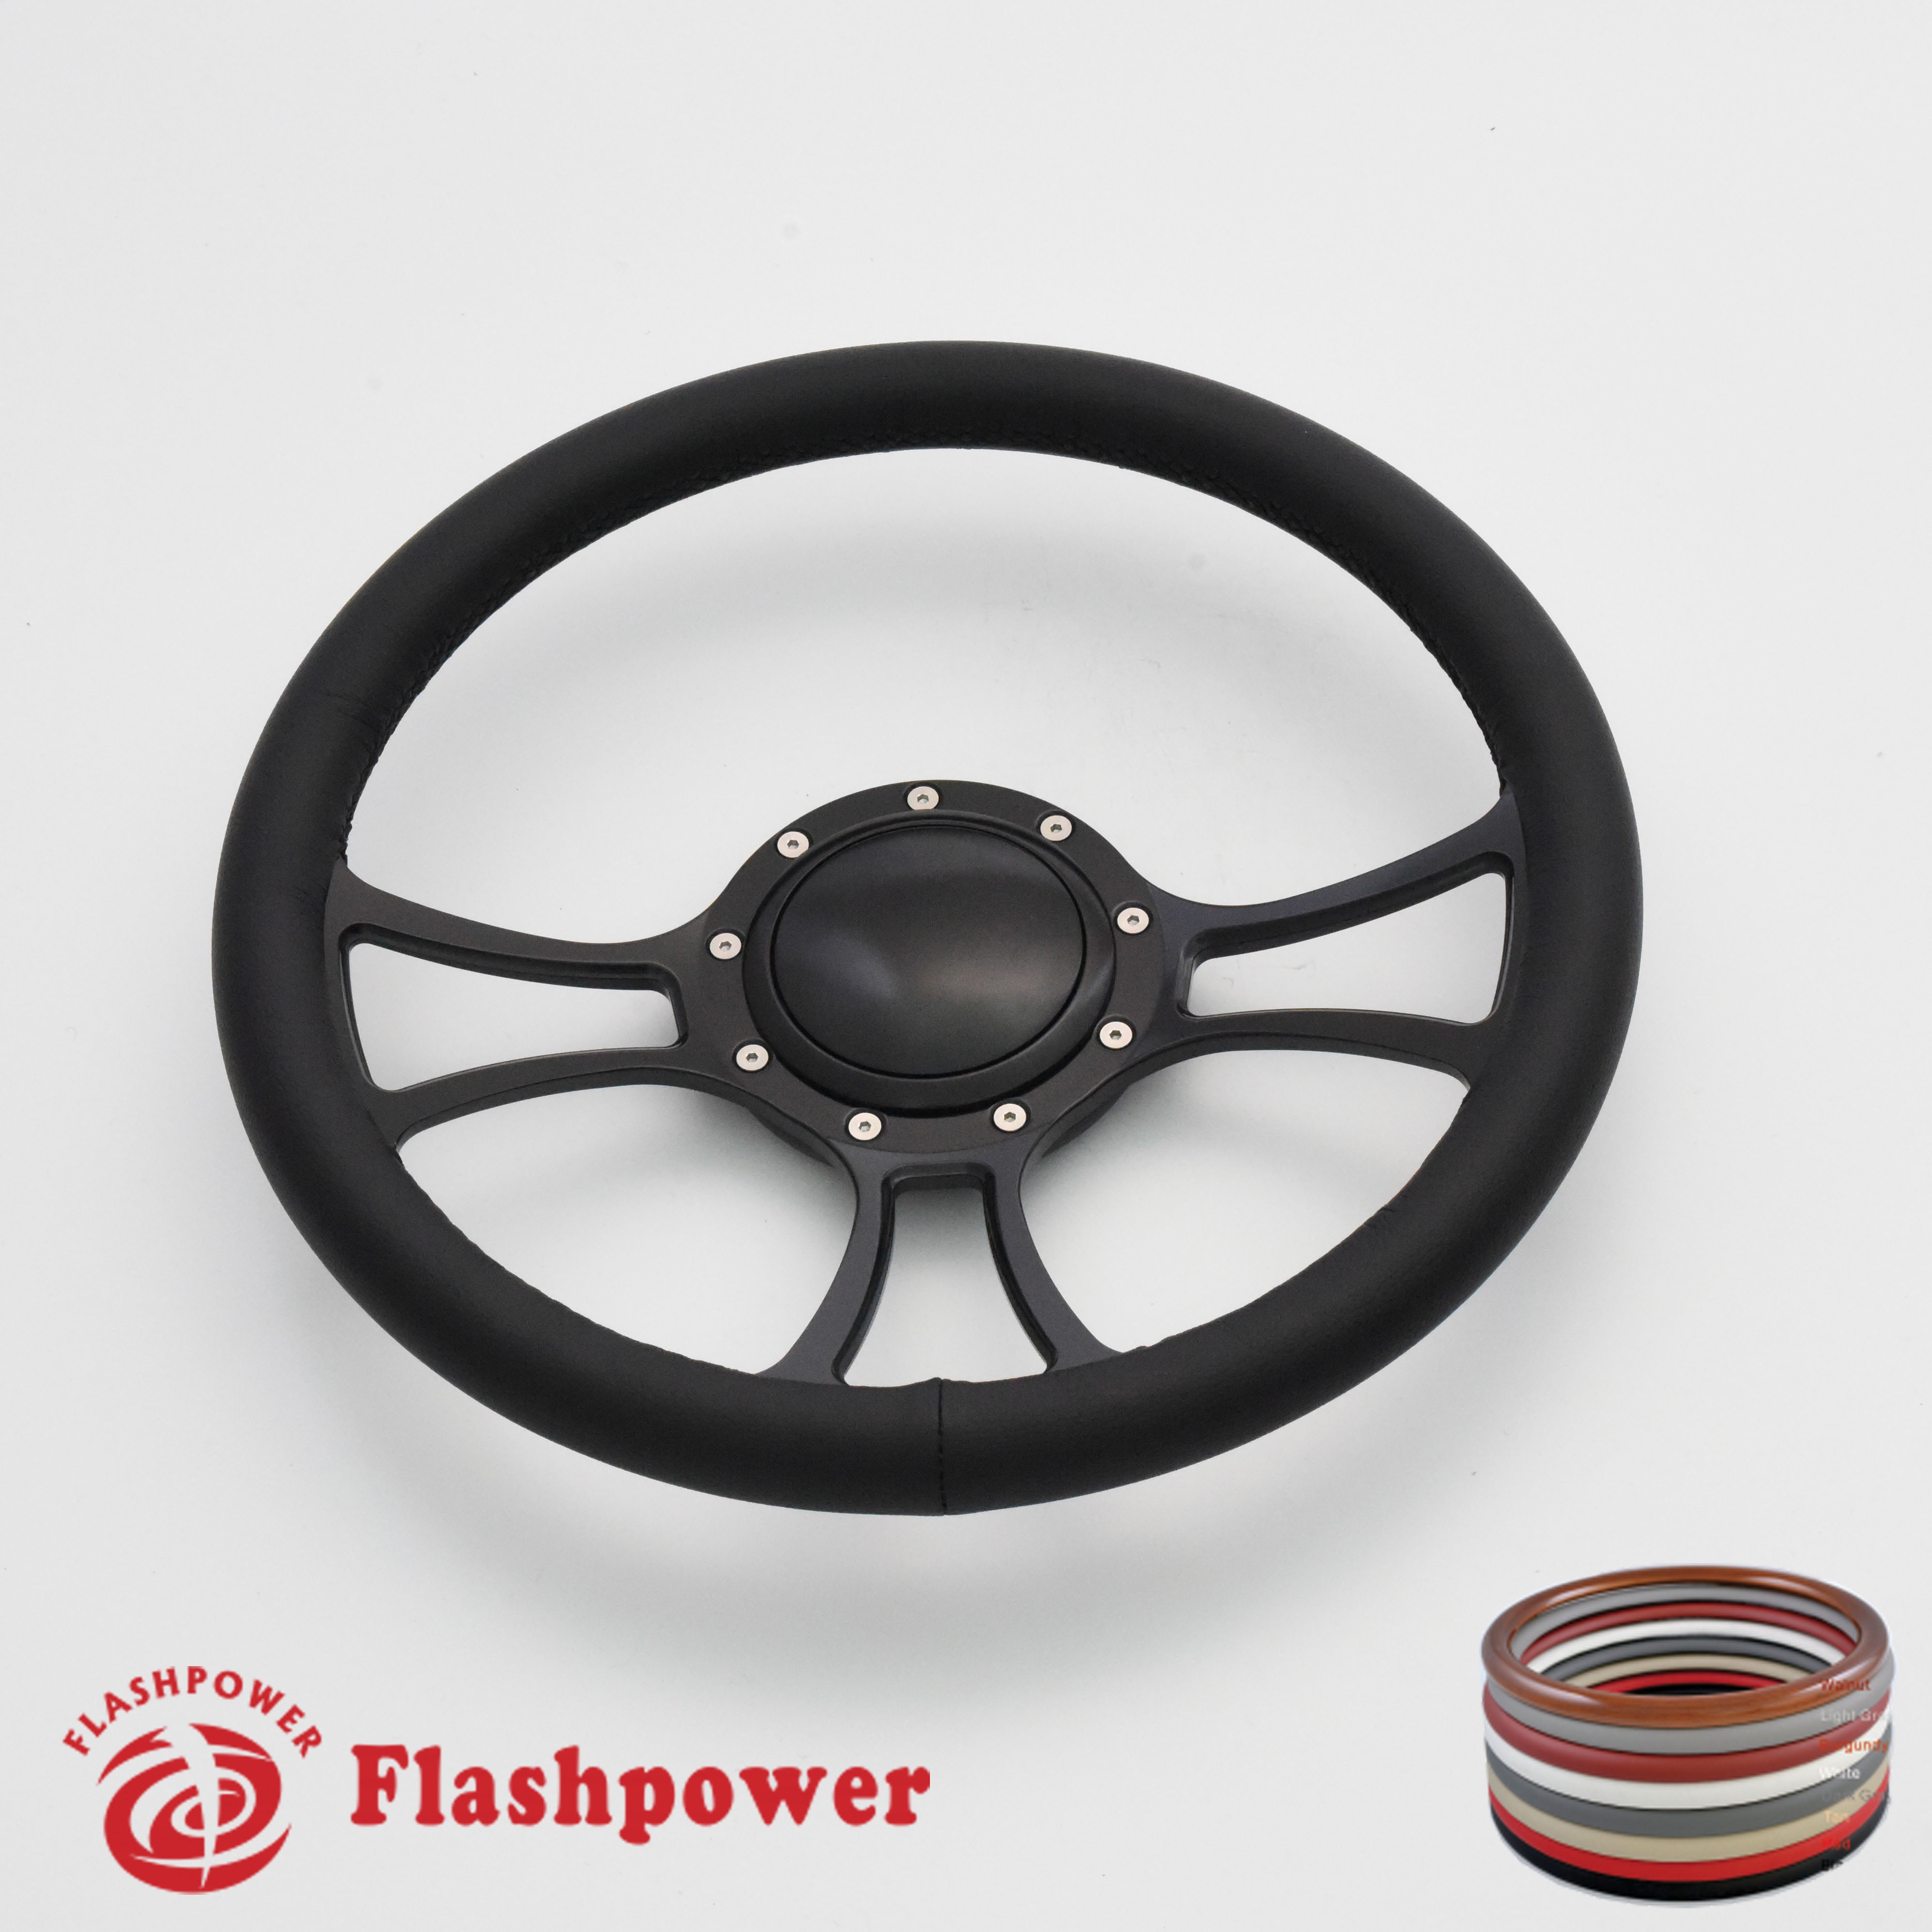 Black Flashpower 14 Billet Half Wrap 9 Bolts Steering Wheel with 2 Dish and Horn Button 